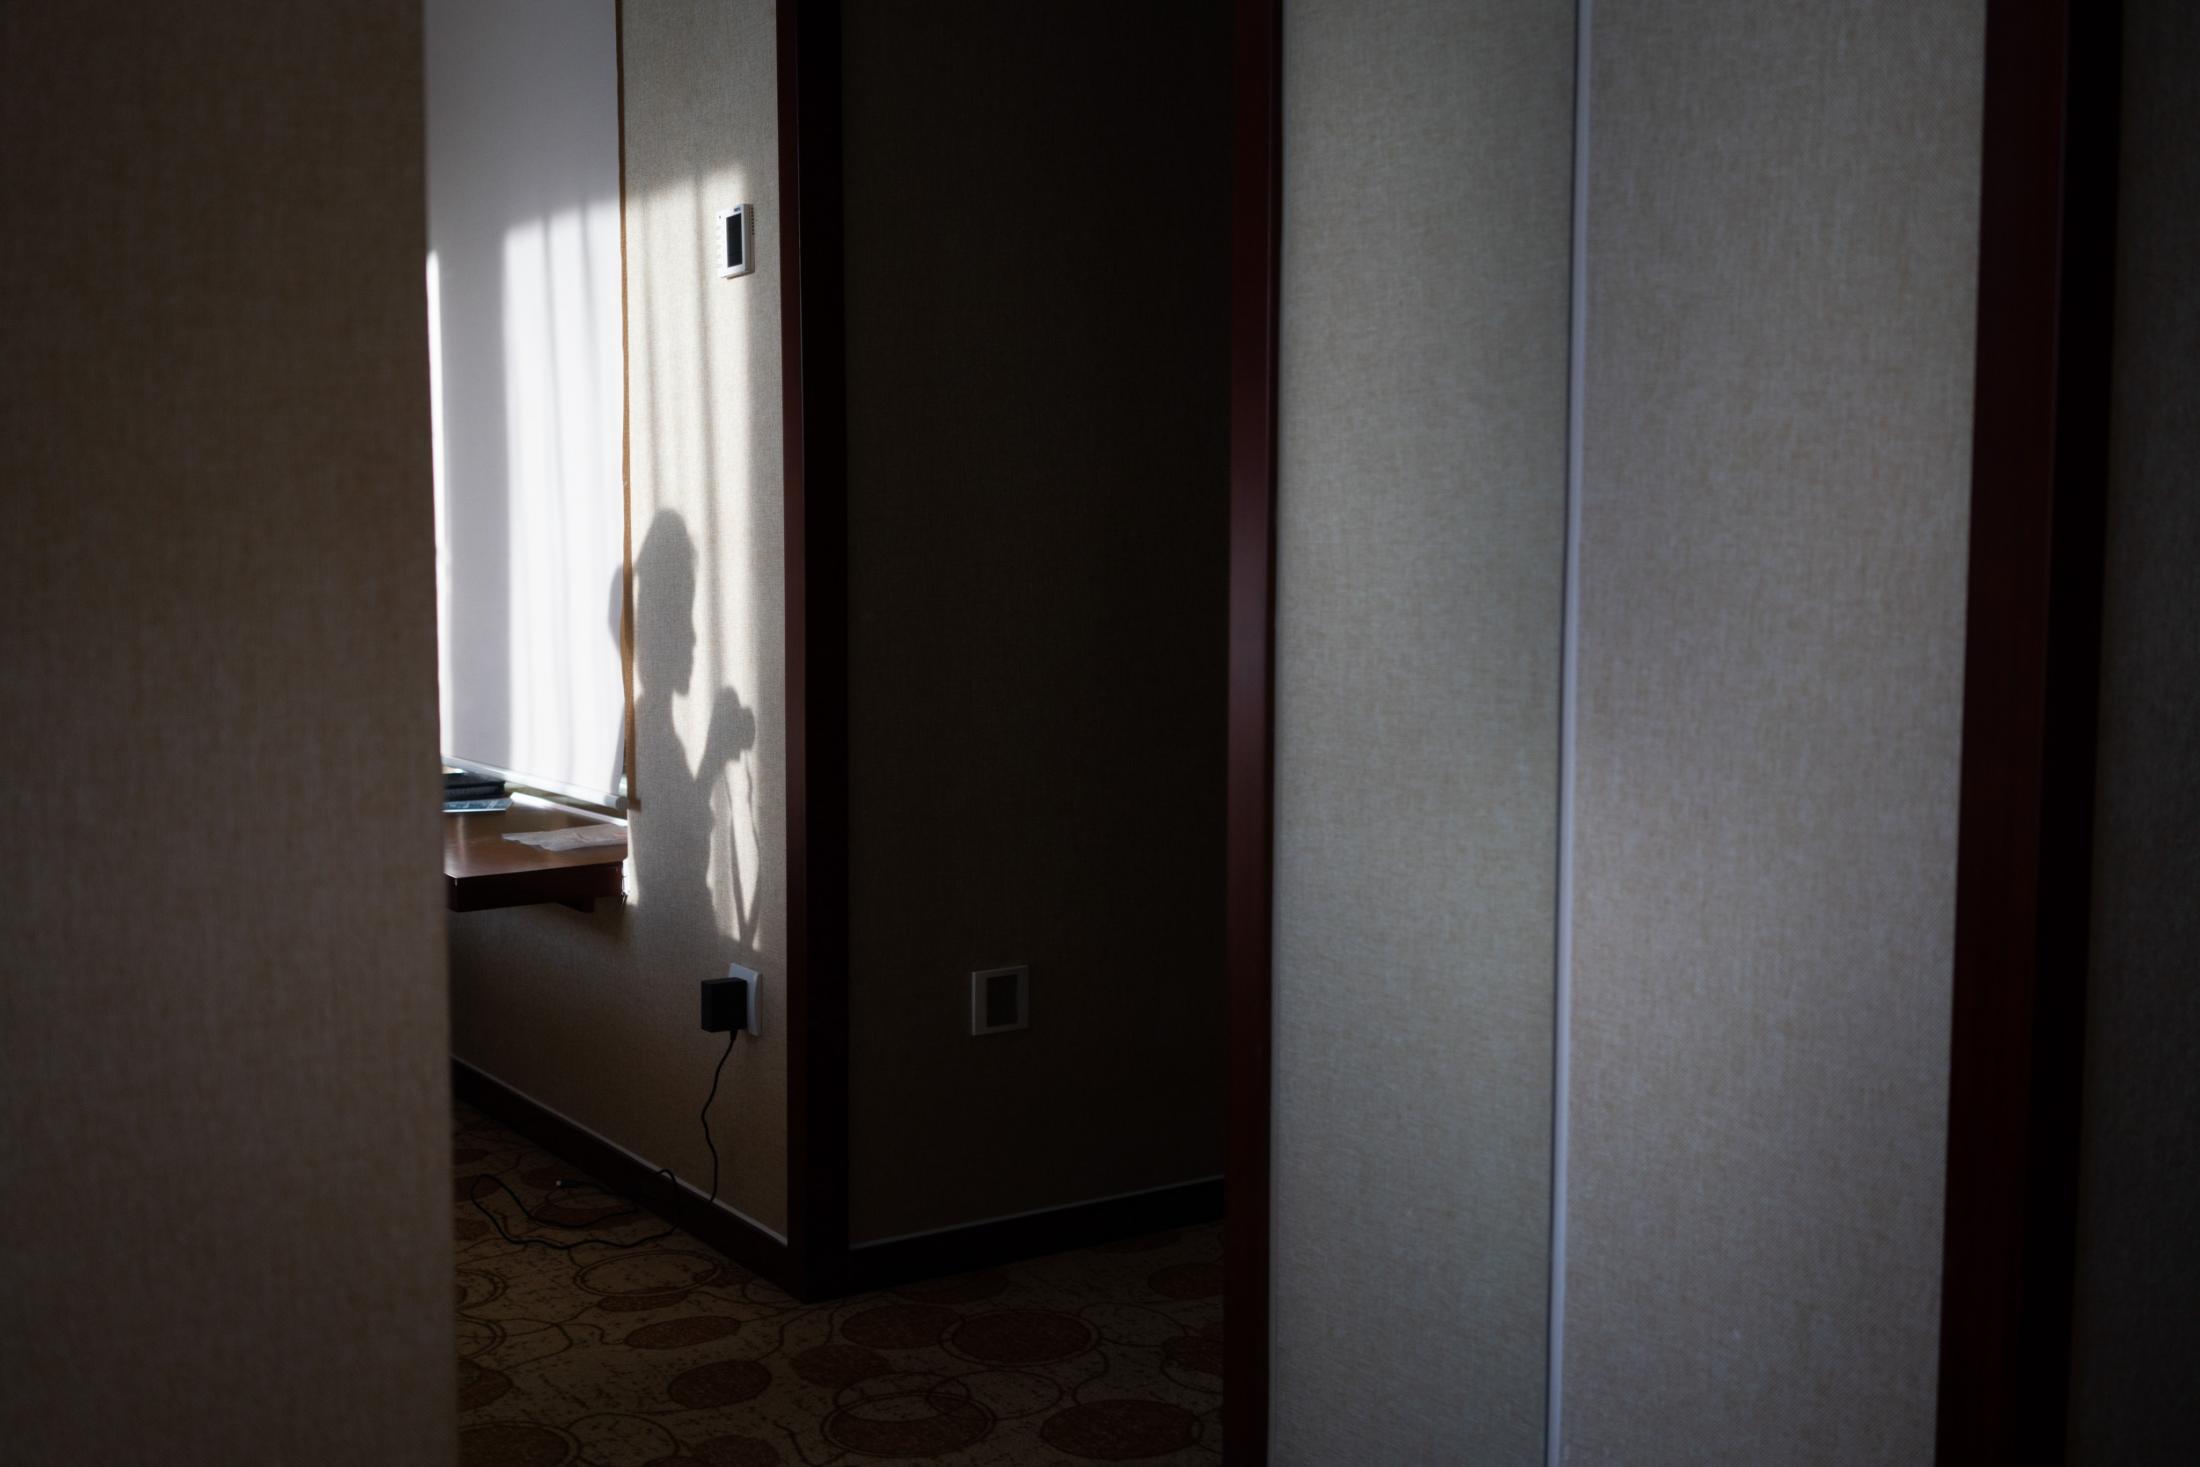 Hotel Quarantine through a Peephole - A self-portrait of my shadow during the sunset hours in...